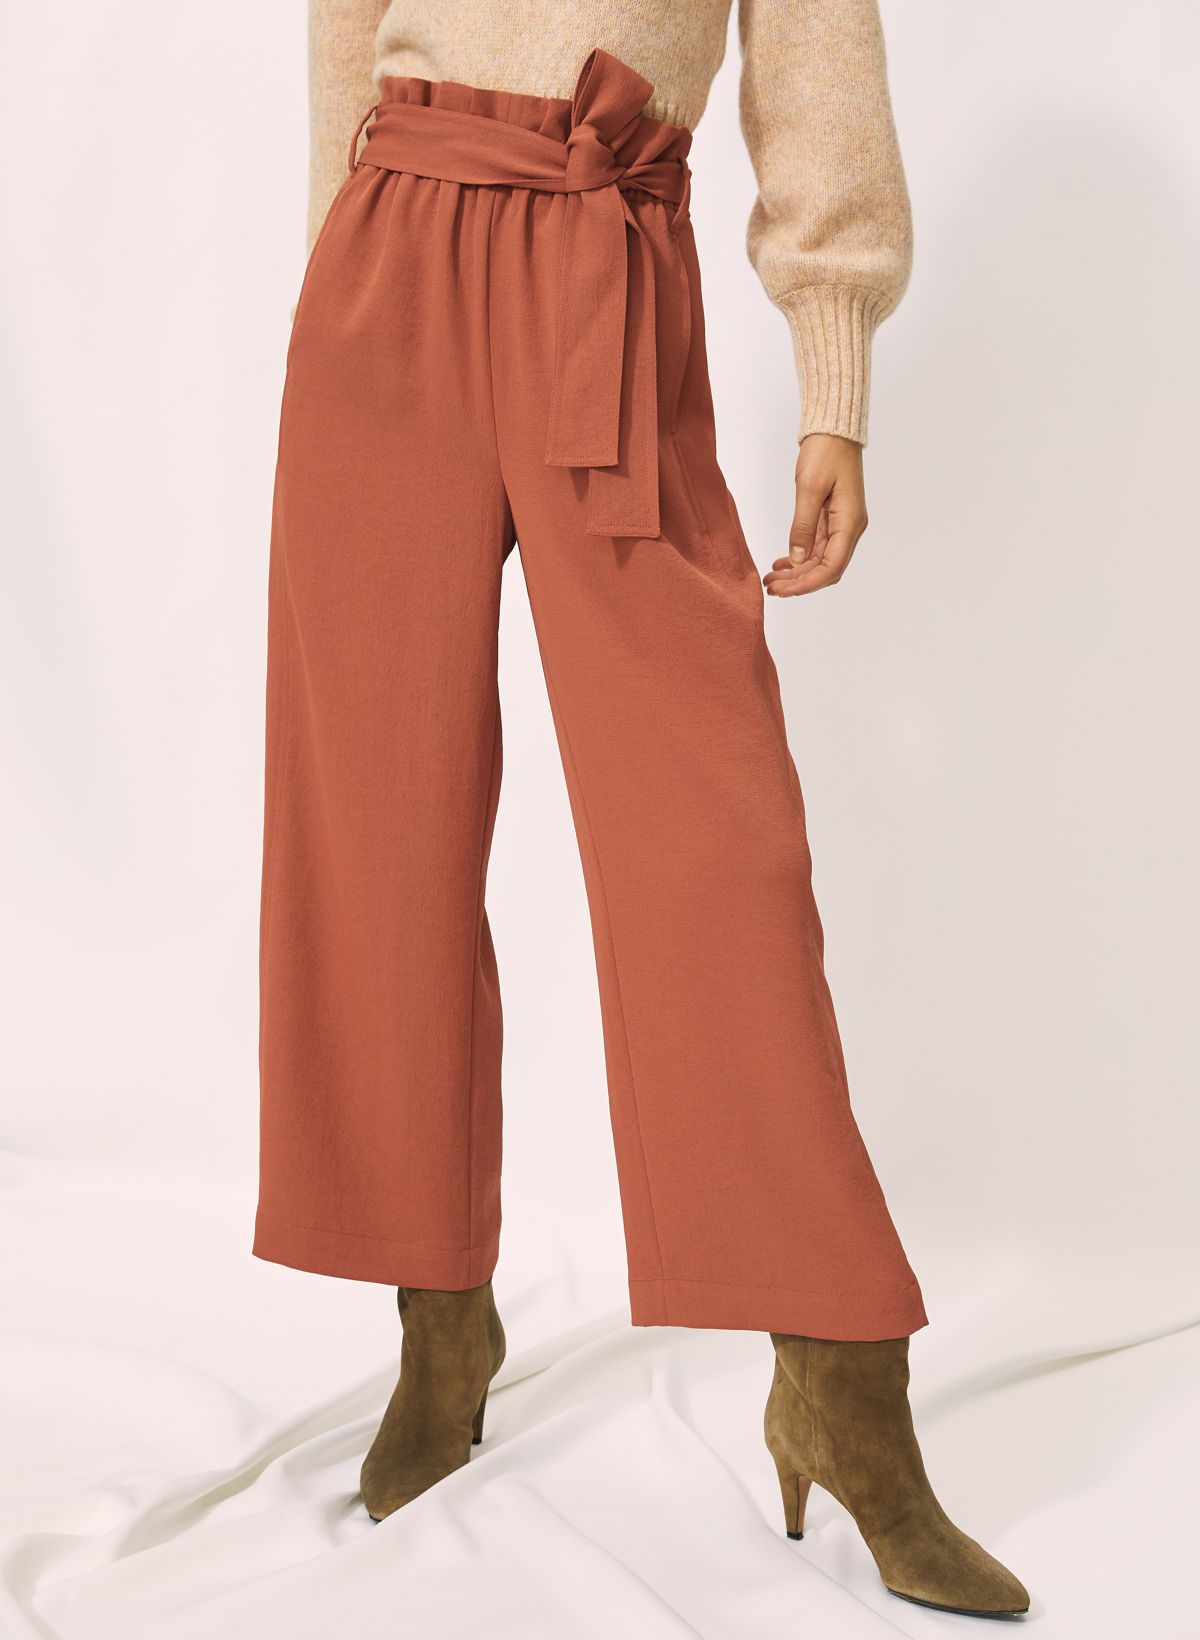 I (5'3) finally found a pair of paper bag pants that don't swallow me up!  Reformation Avalon in petite. Perfect for workdays and the weekend! :  r/PetiteFashionAdvice